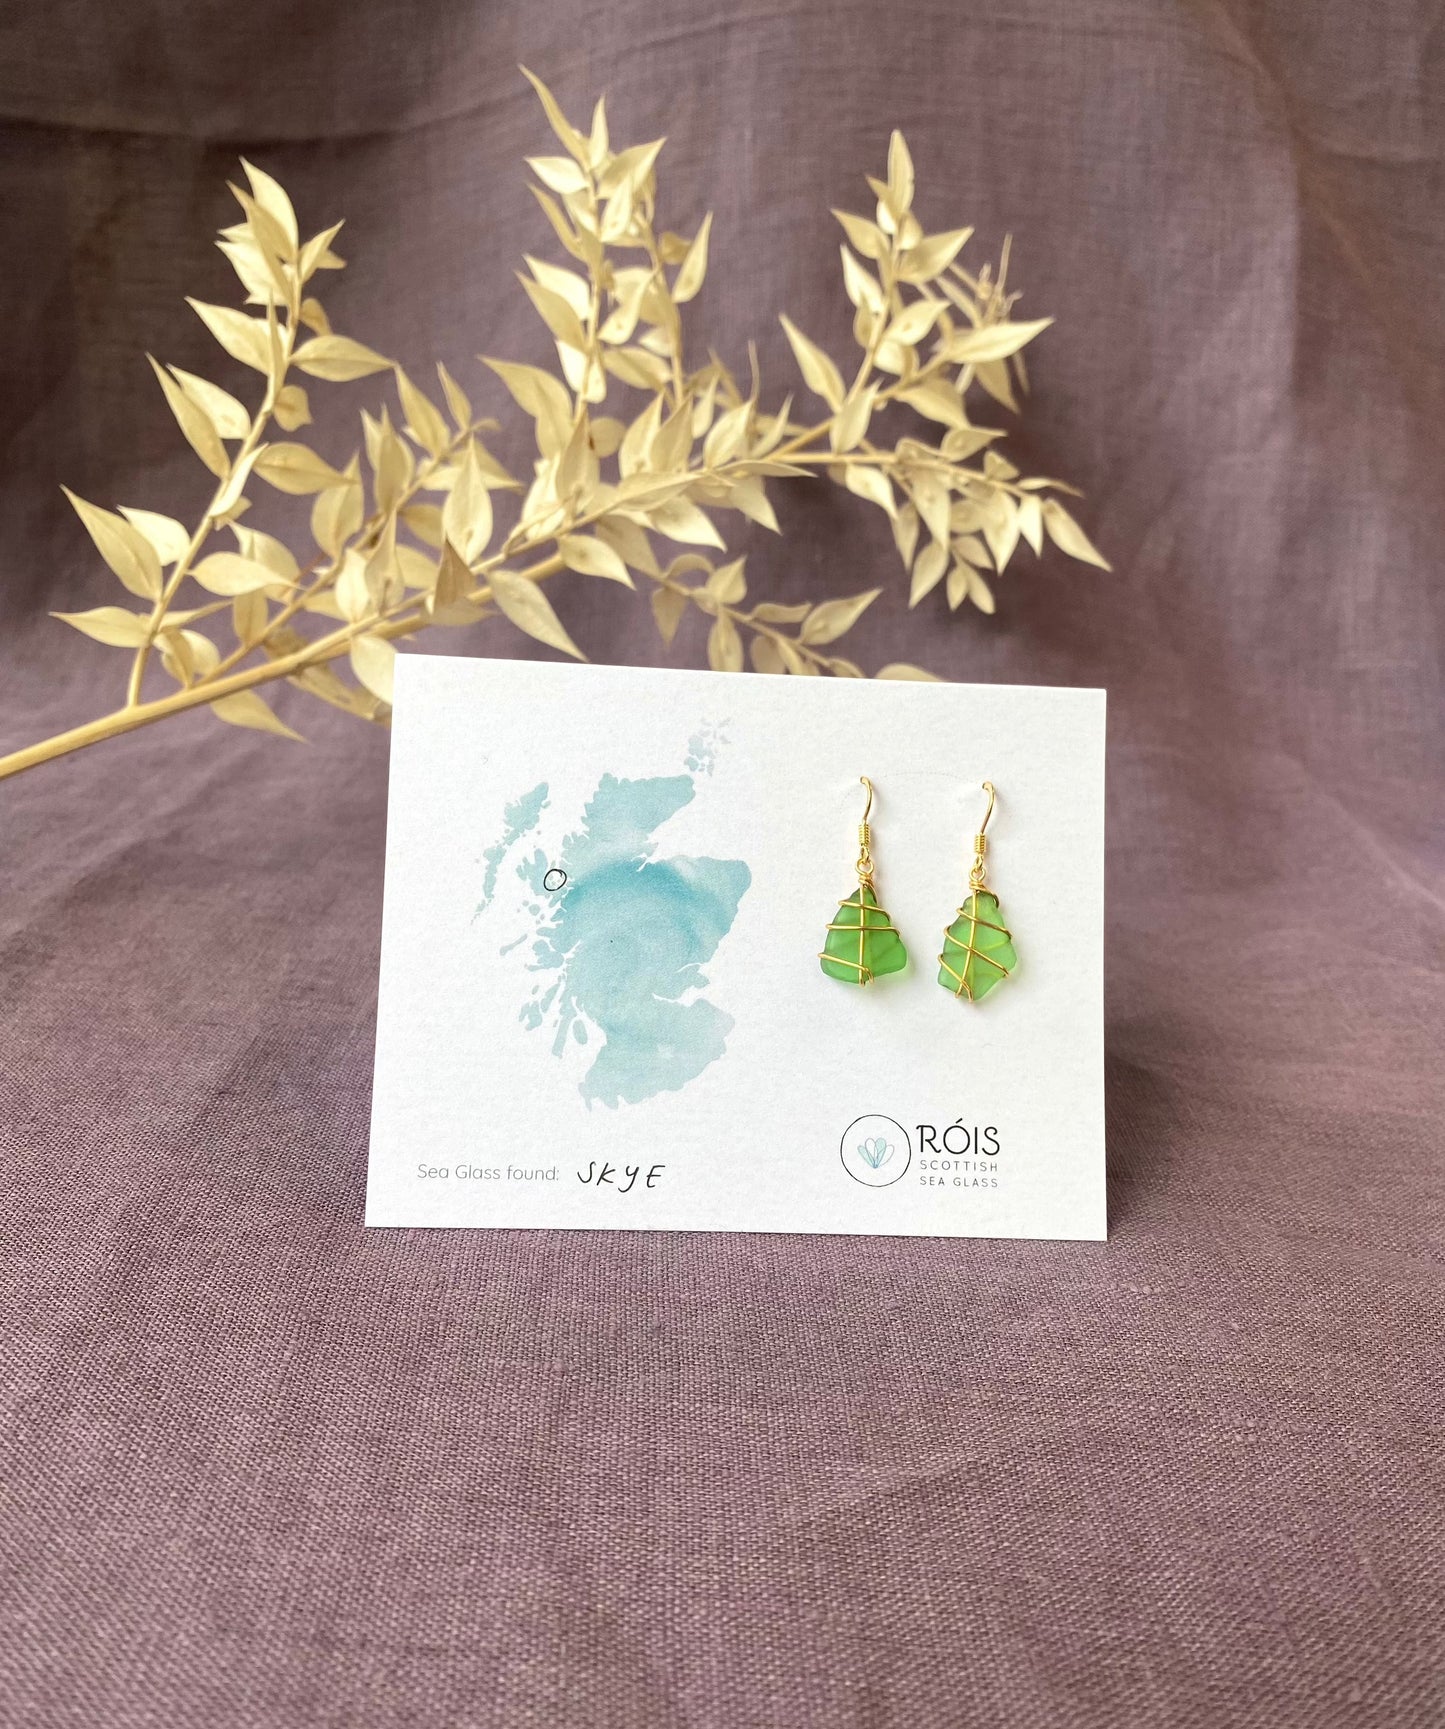 Classic gold earrings - Bright Green